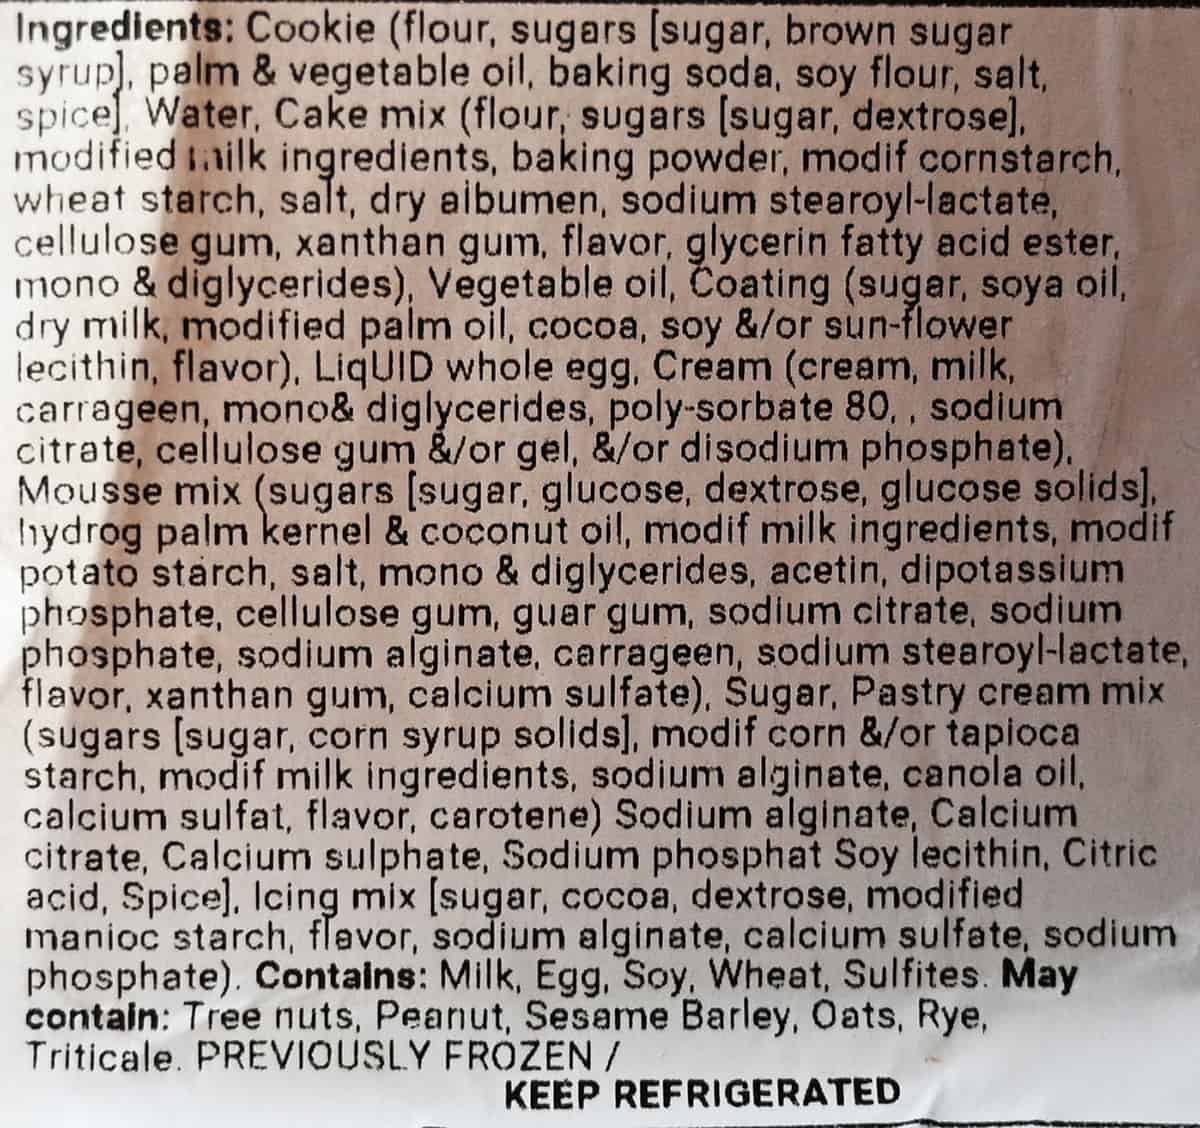 Image of the ingredients list from the label on the cake.